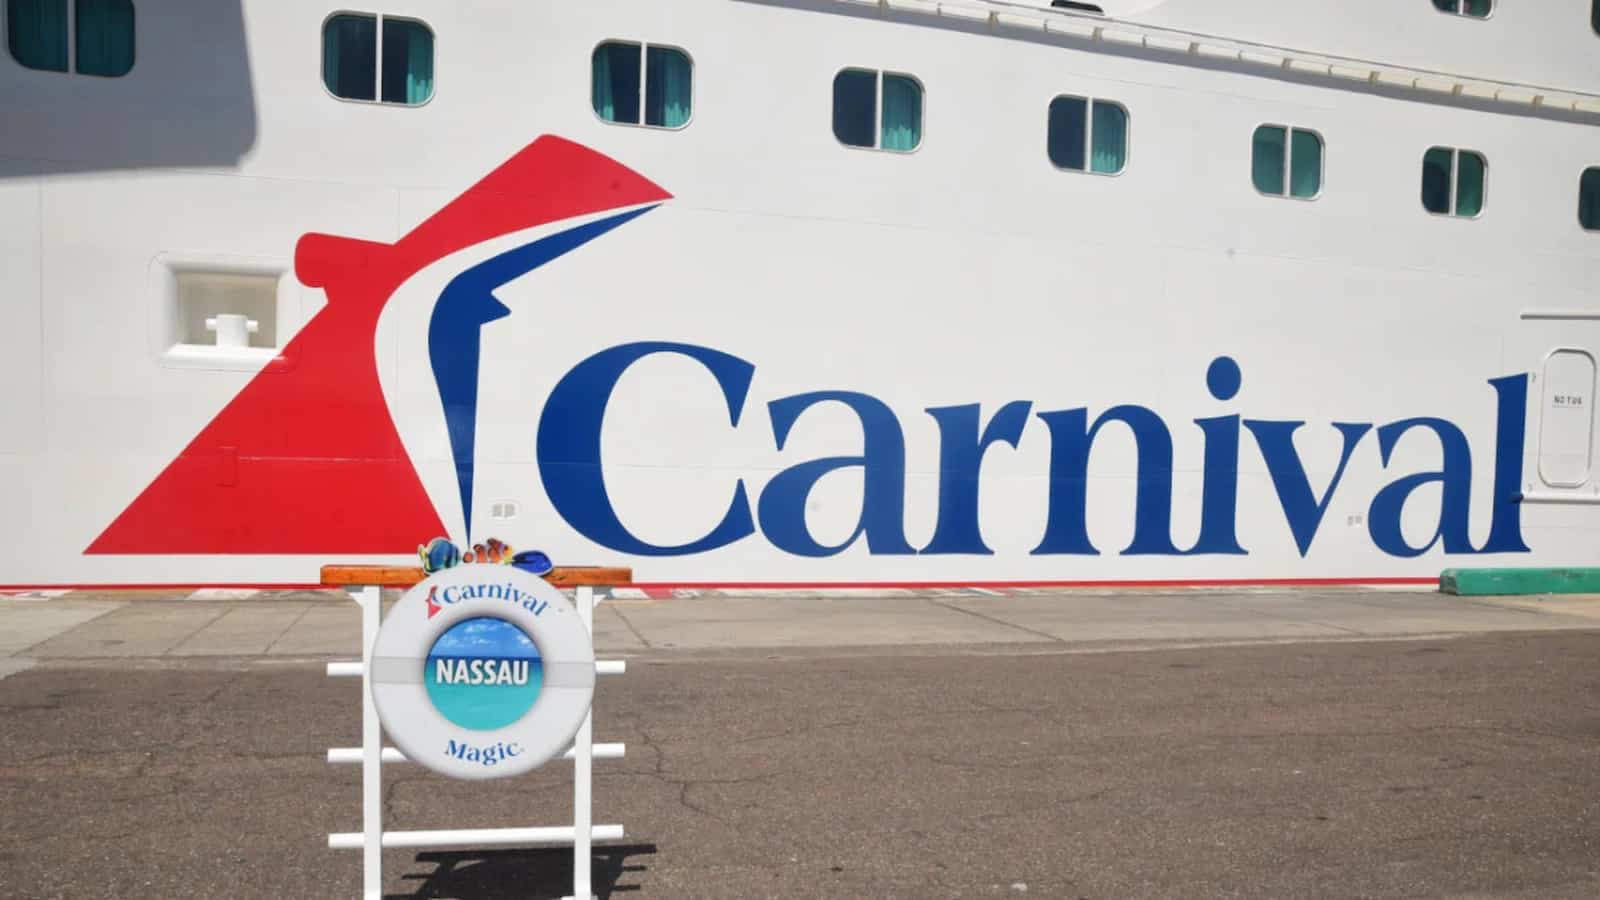 Best Booking Experience awarded to Carnival Cruise Line